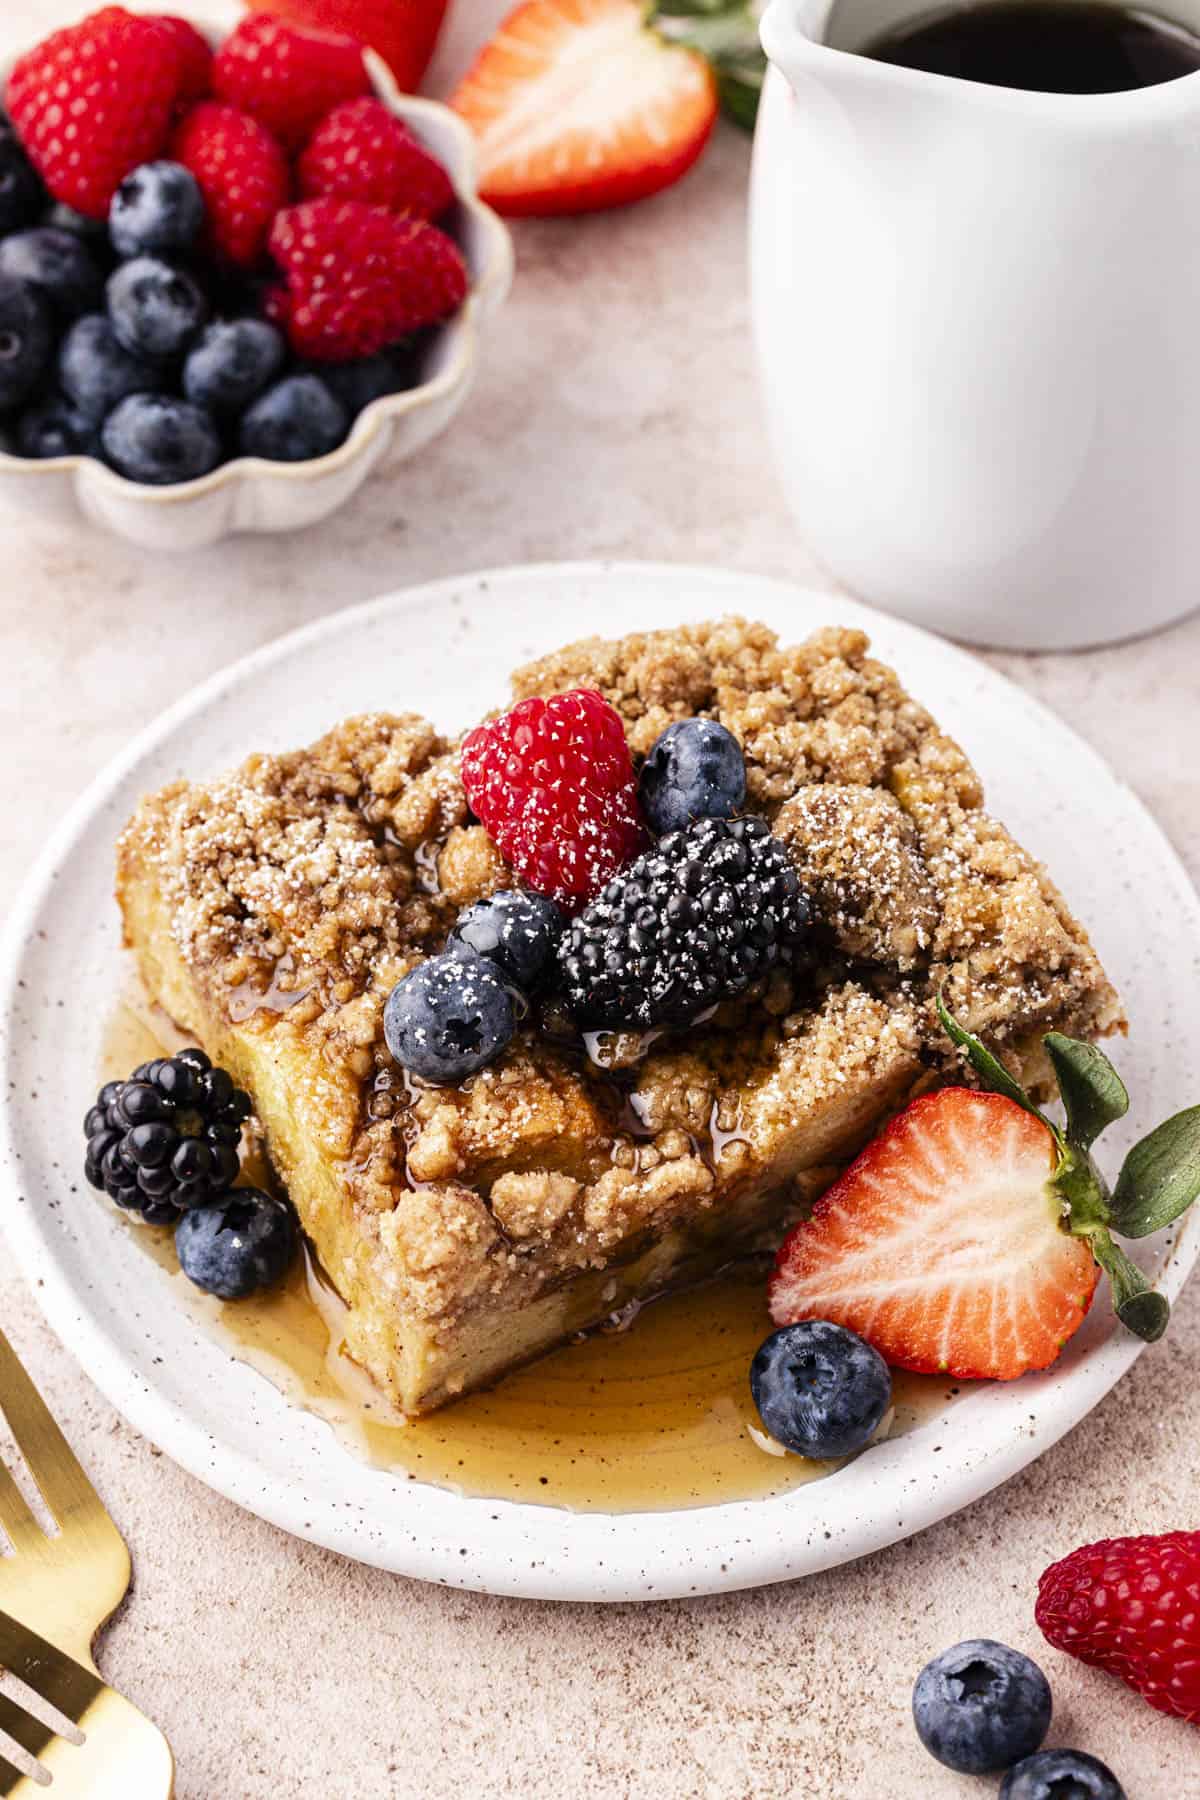 a small plate with a slice of french toast casserole on it topped with maple syrup, fresh berries and a light dusting of powered sugar beside a small bowl of fresh berries, a white dish of syrup, two forks and more berries scattered around